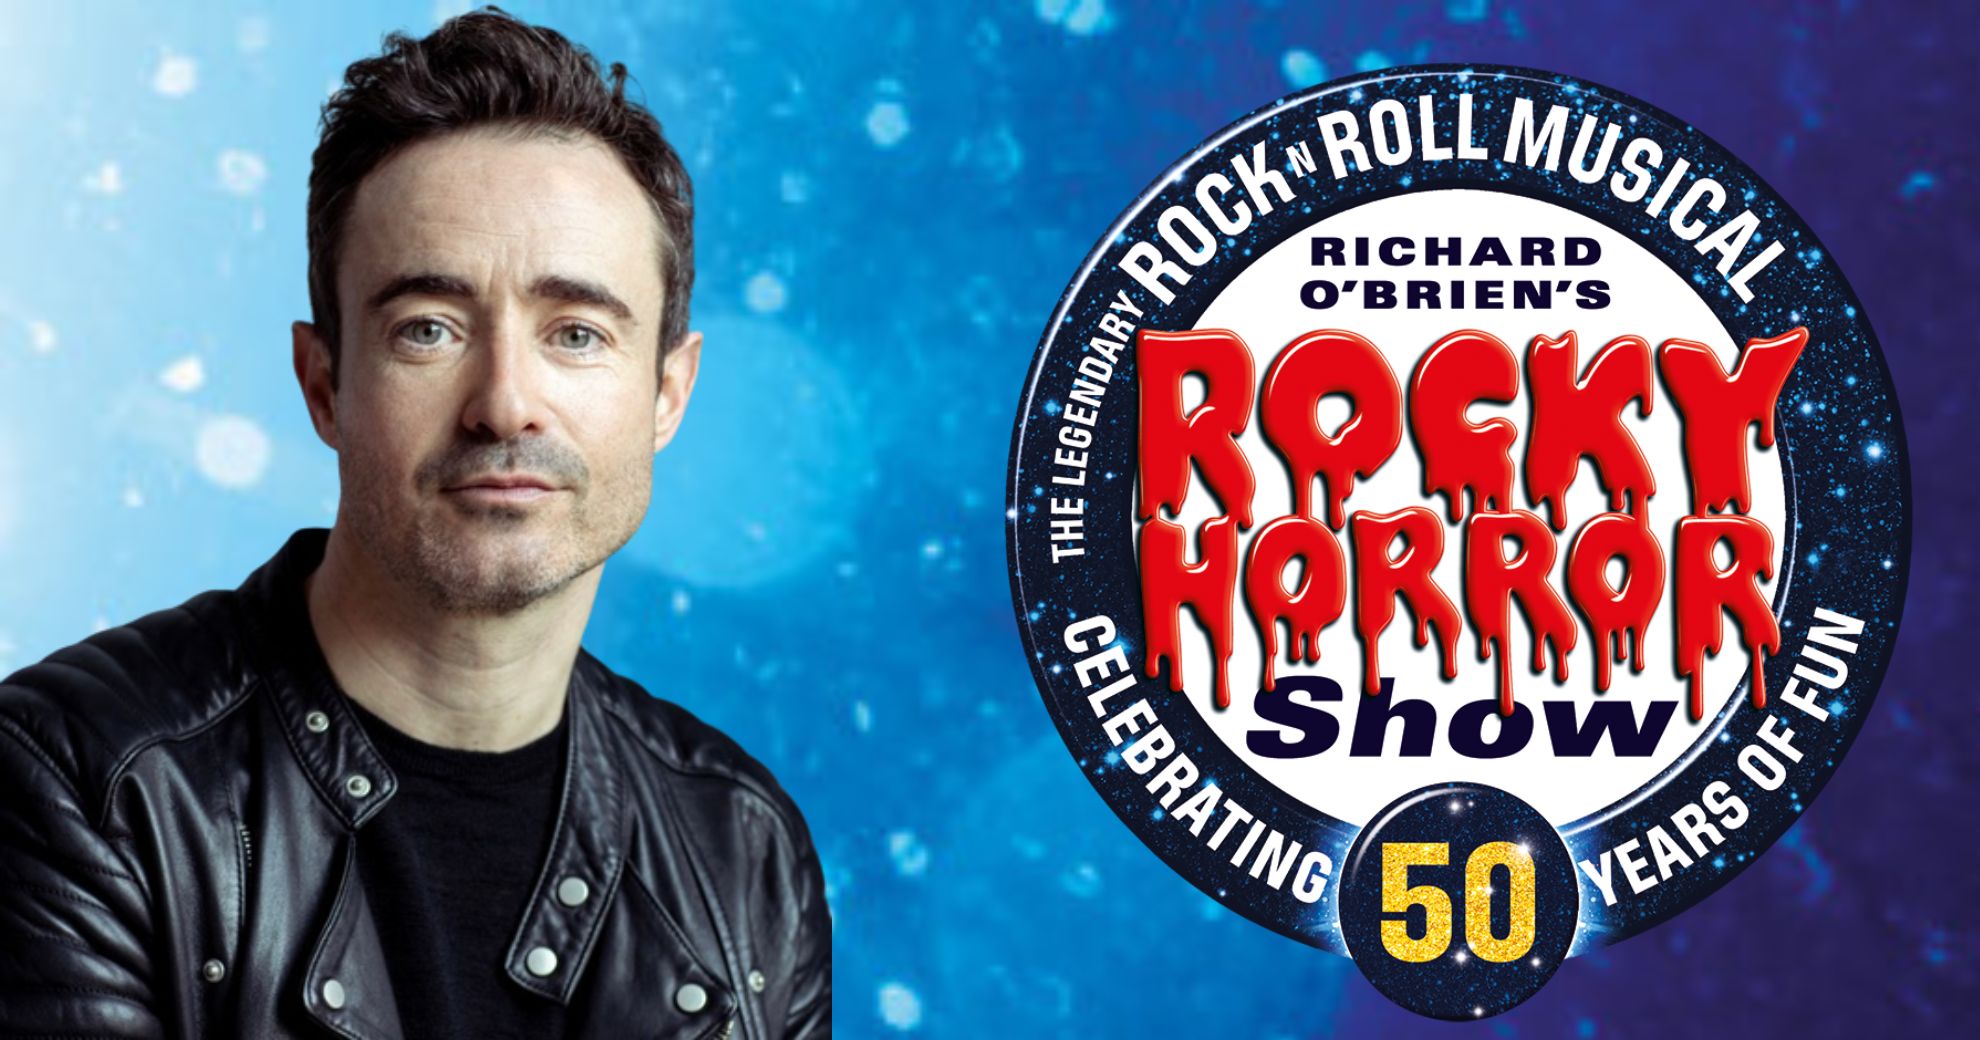 HOLBY CITY & STRICTLY STAR JOE MCFADDEN  TO PLAY THE NARRATOR FOR A FOUR WEEK LIMITED RUN